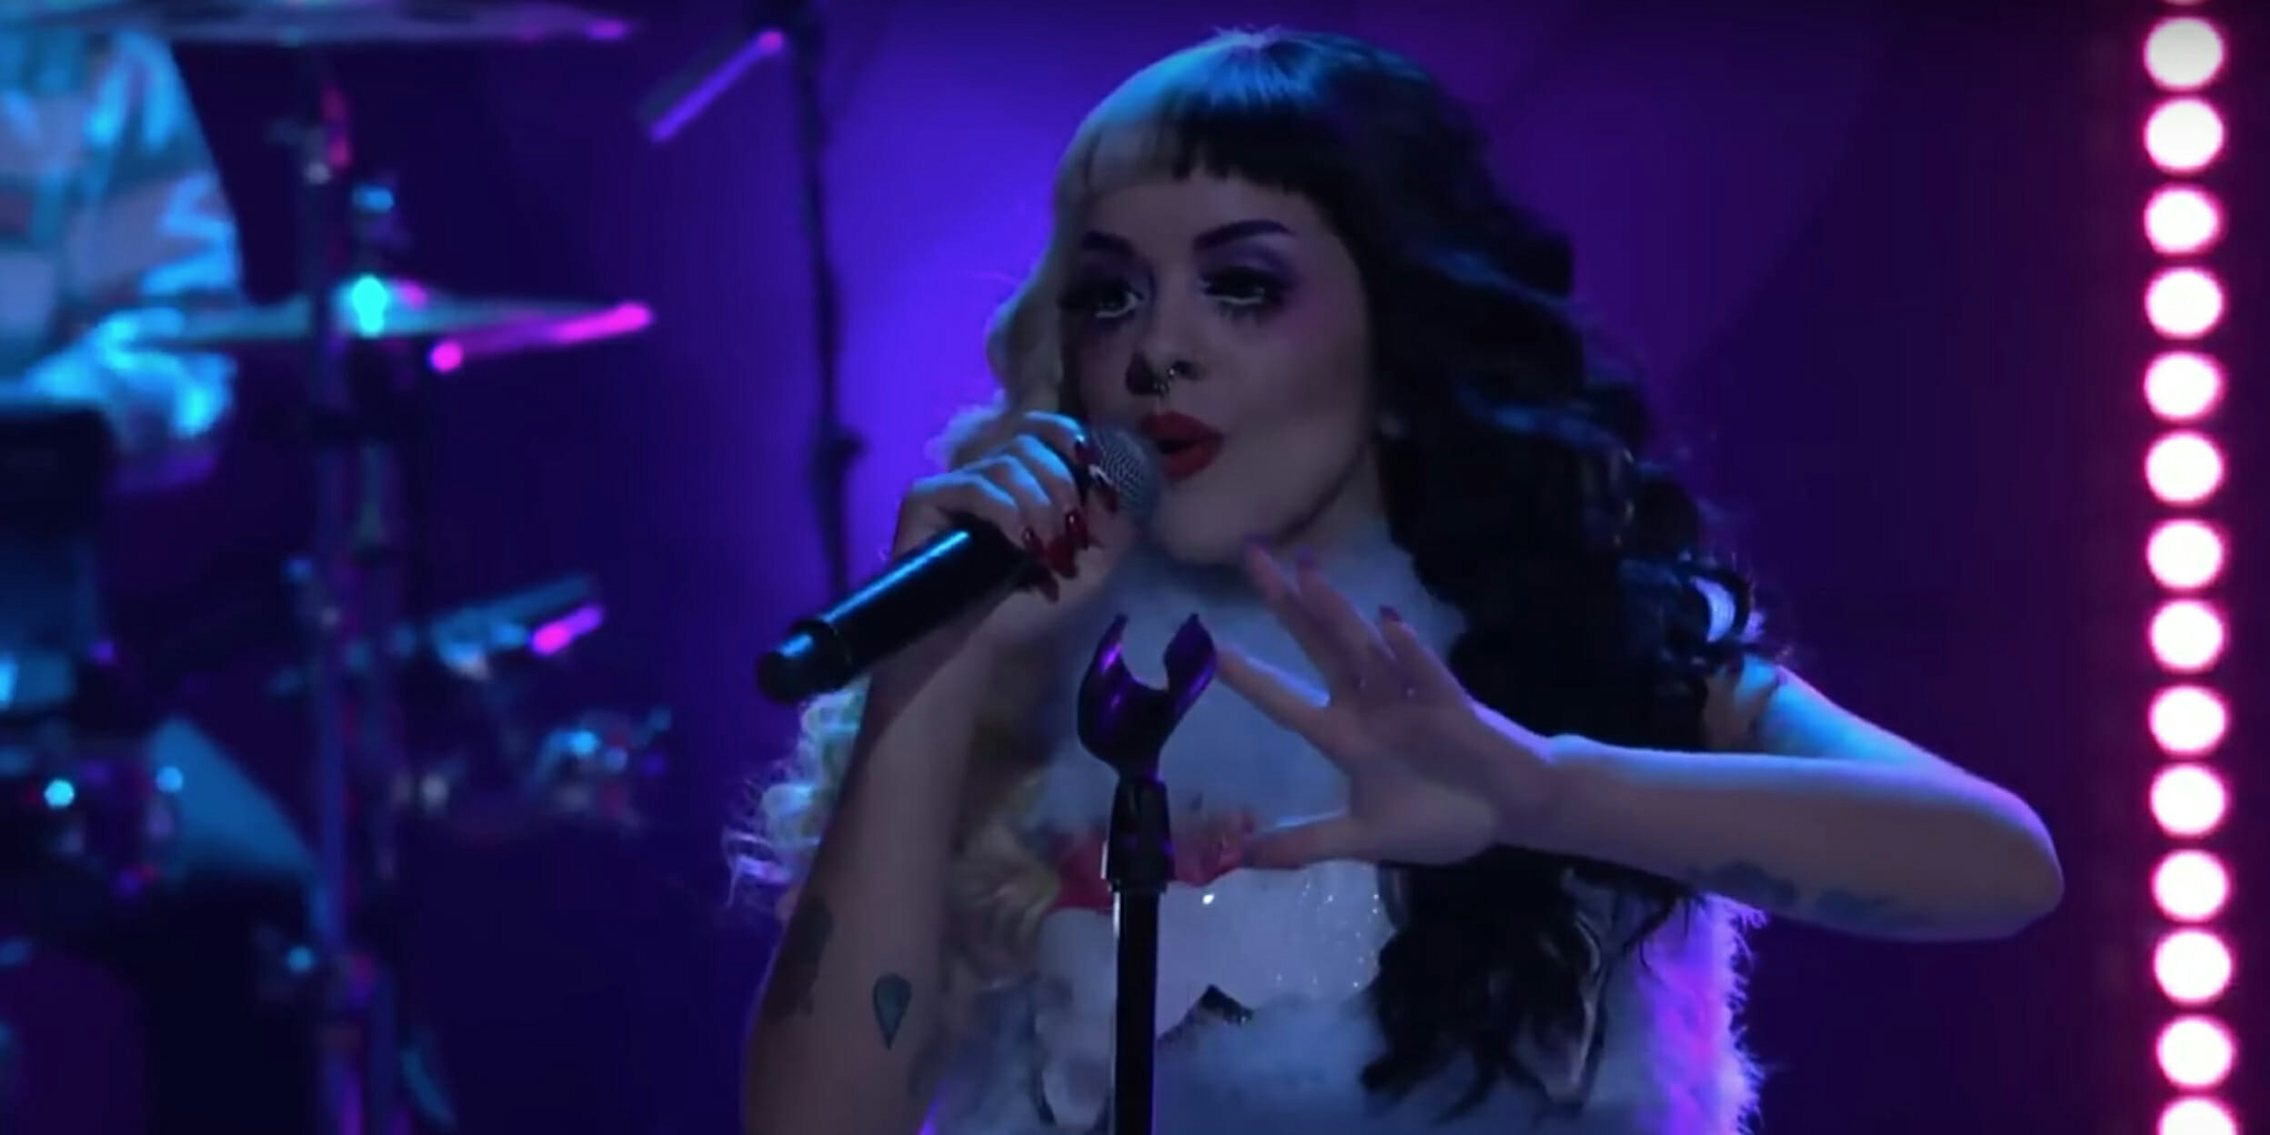 A former friend accused singer and songwriter Melanie Martinez of sexually assault.